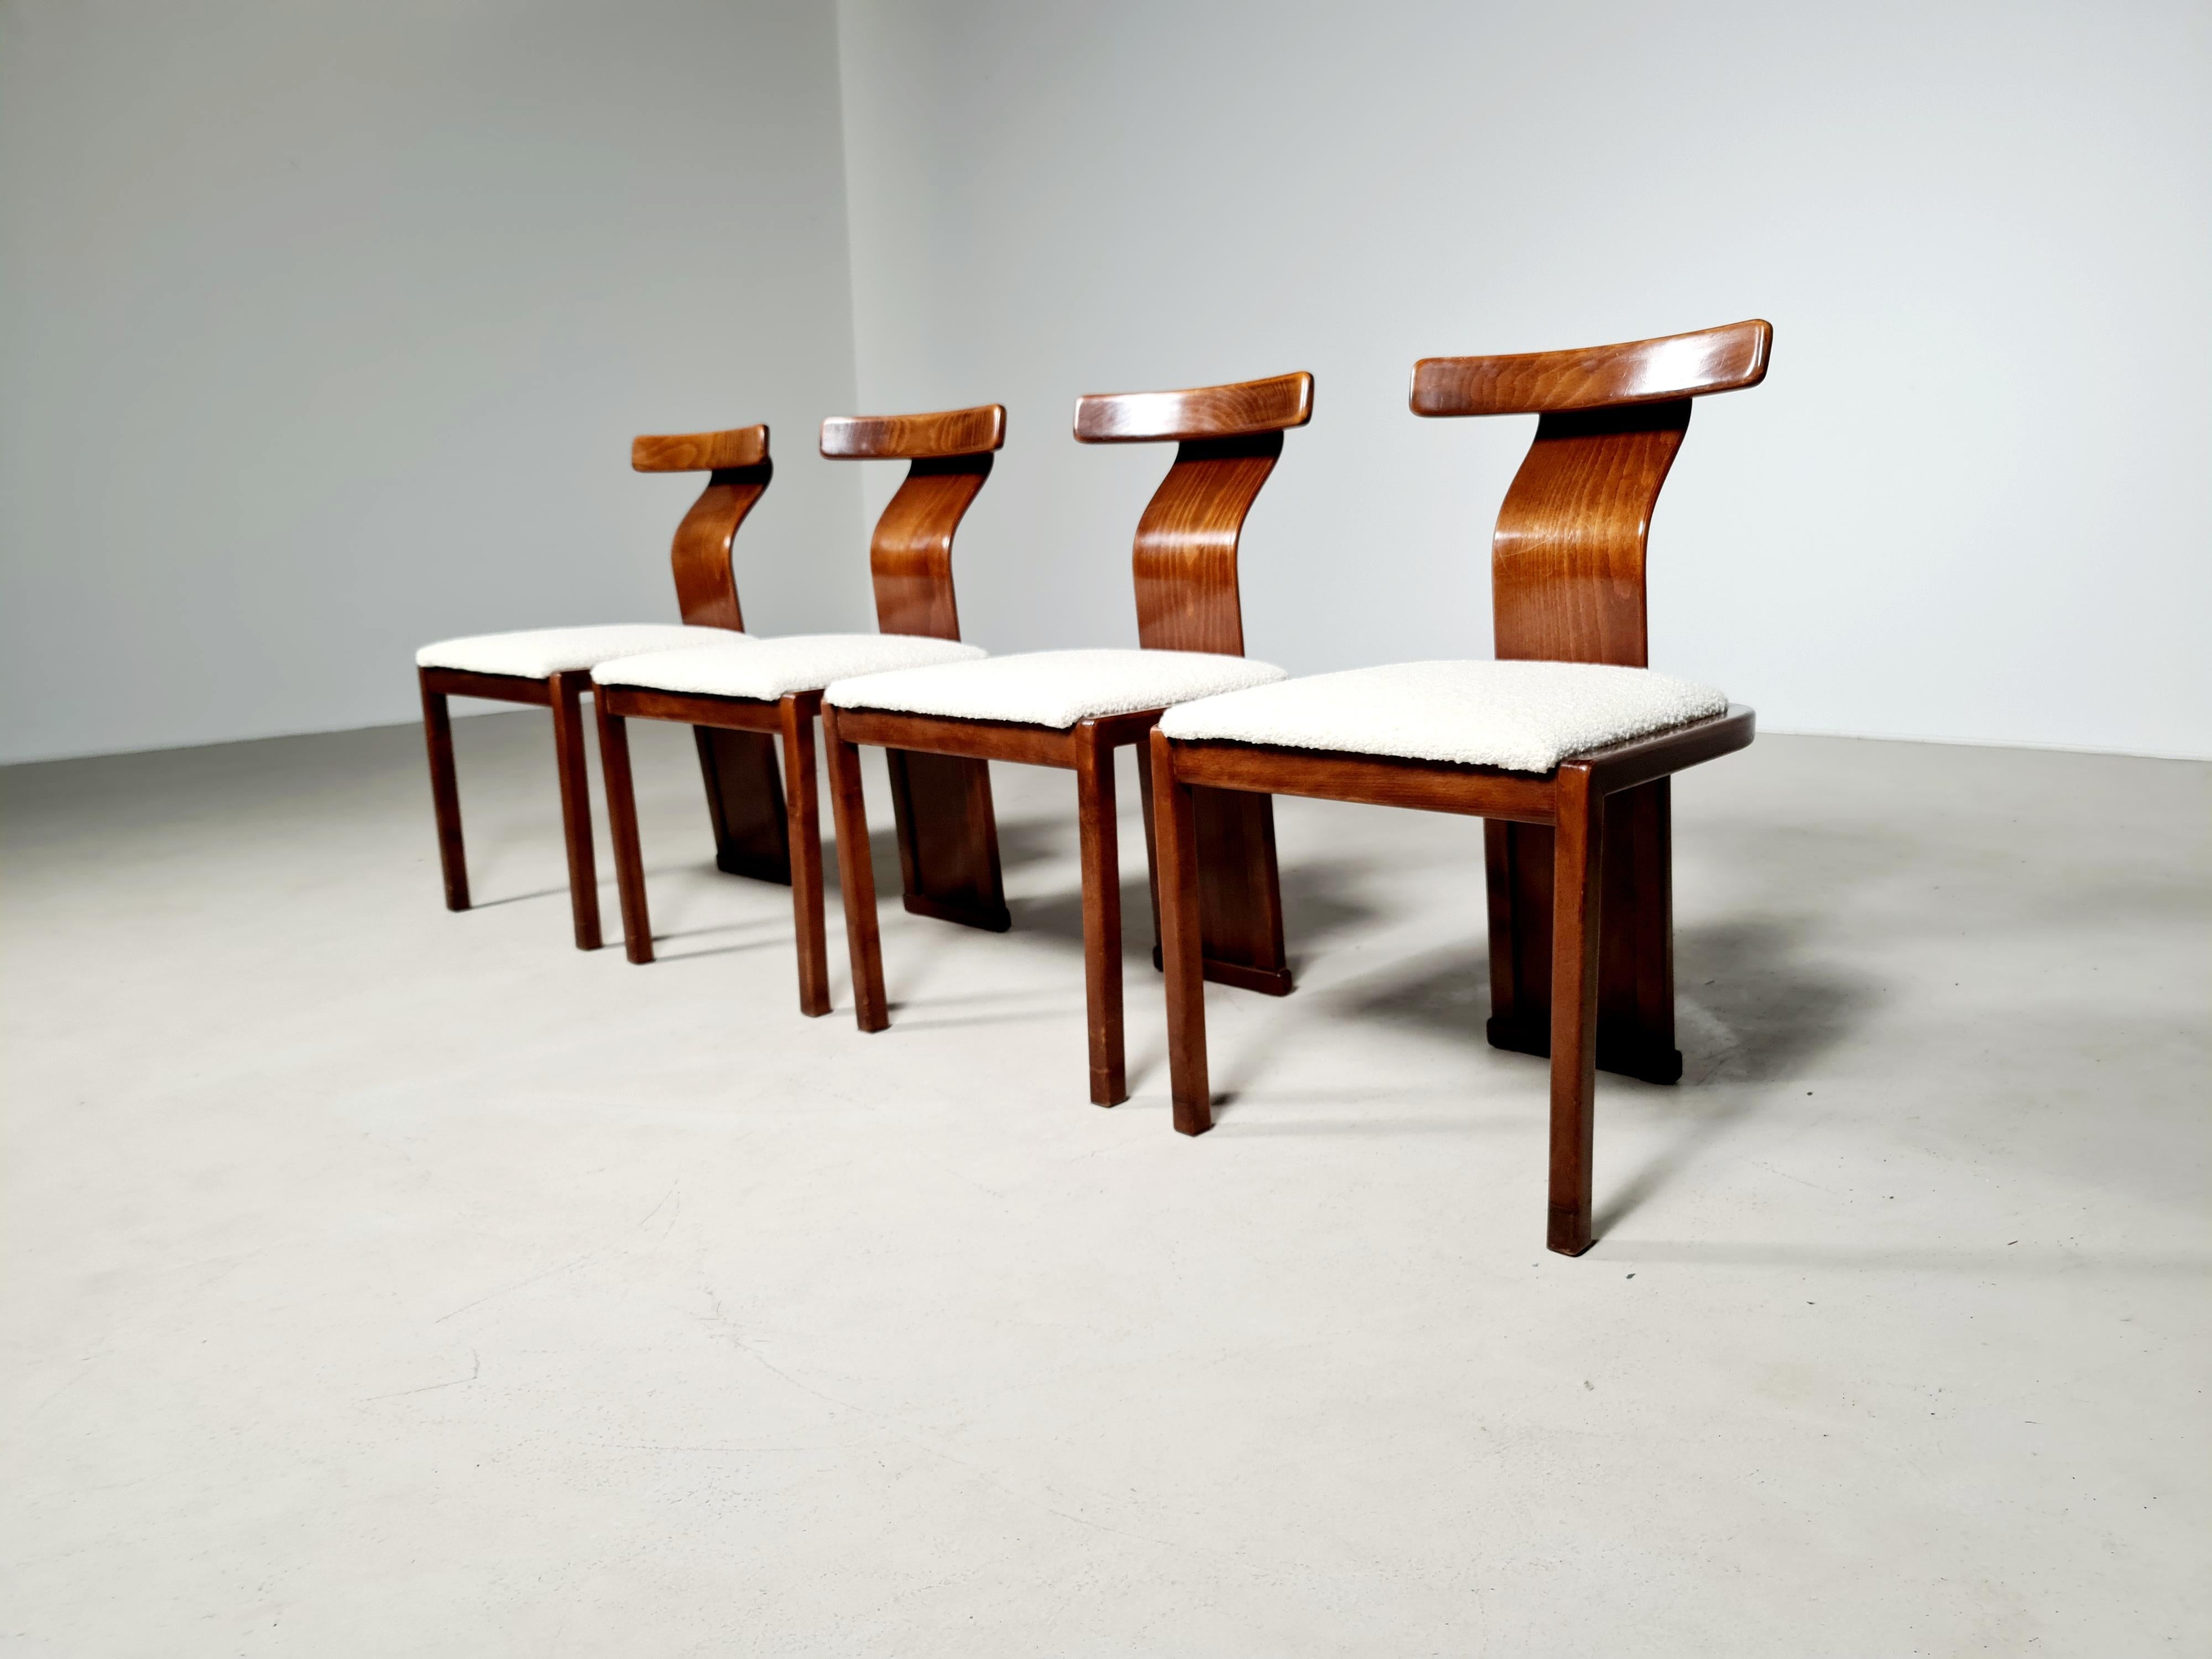 Set of four vintage sculptural chairs with wonderful backrests from Italy, 1960s. The color of the Italian laquered walnut frame is deep and warm which accompanies the reupholstered boucle seats very well.